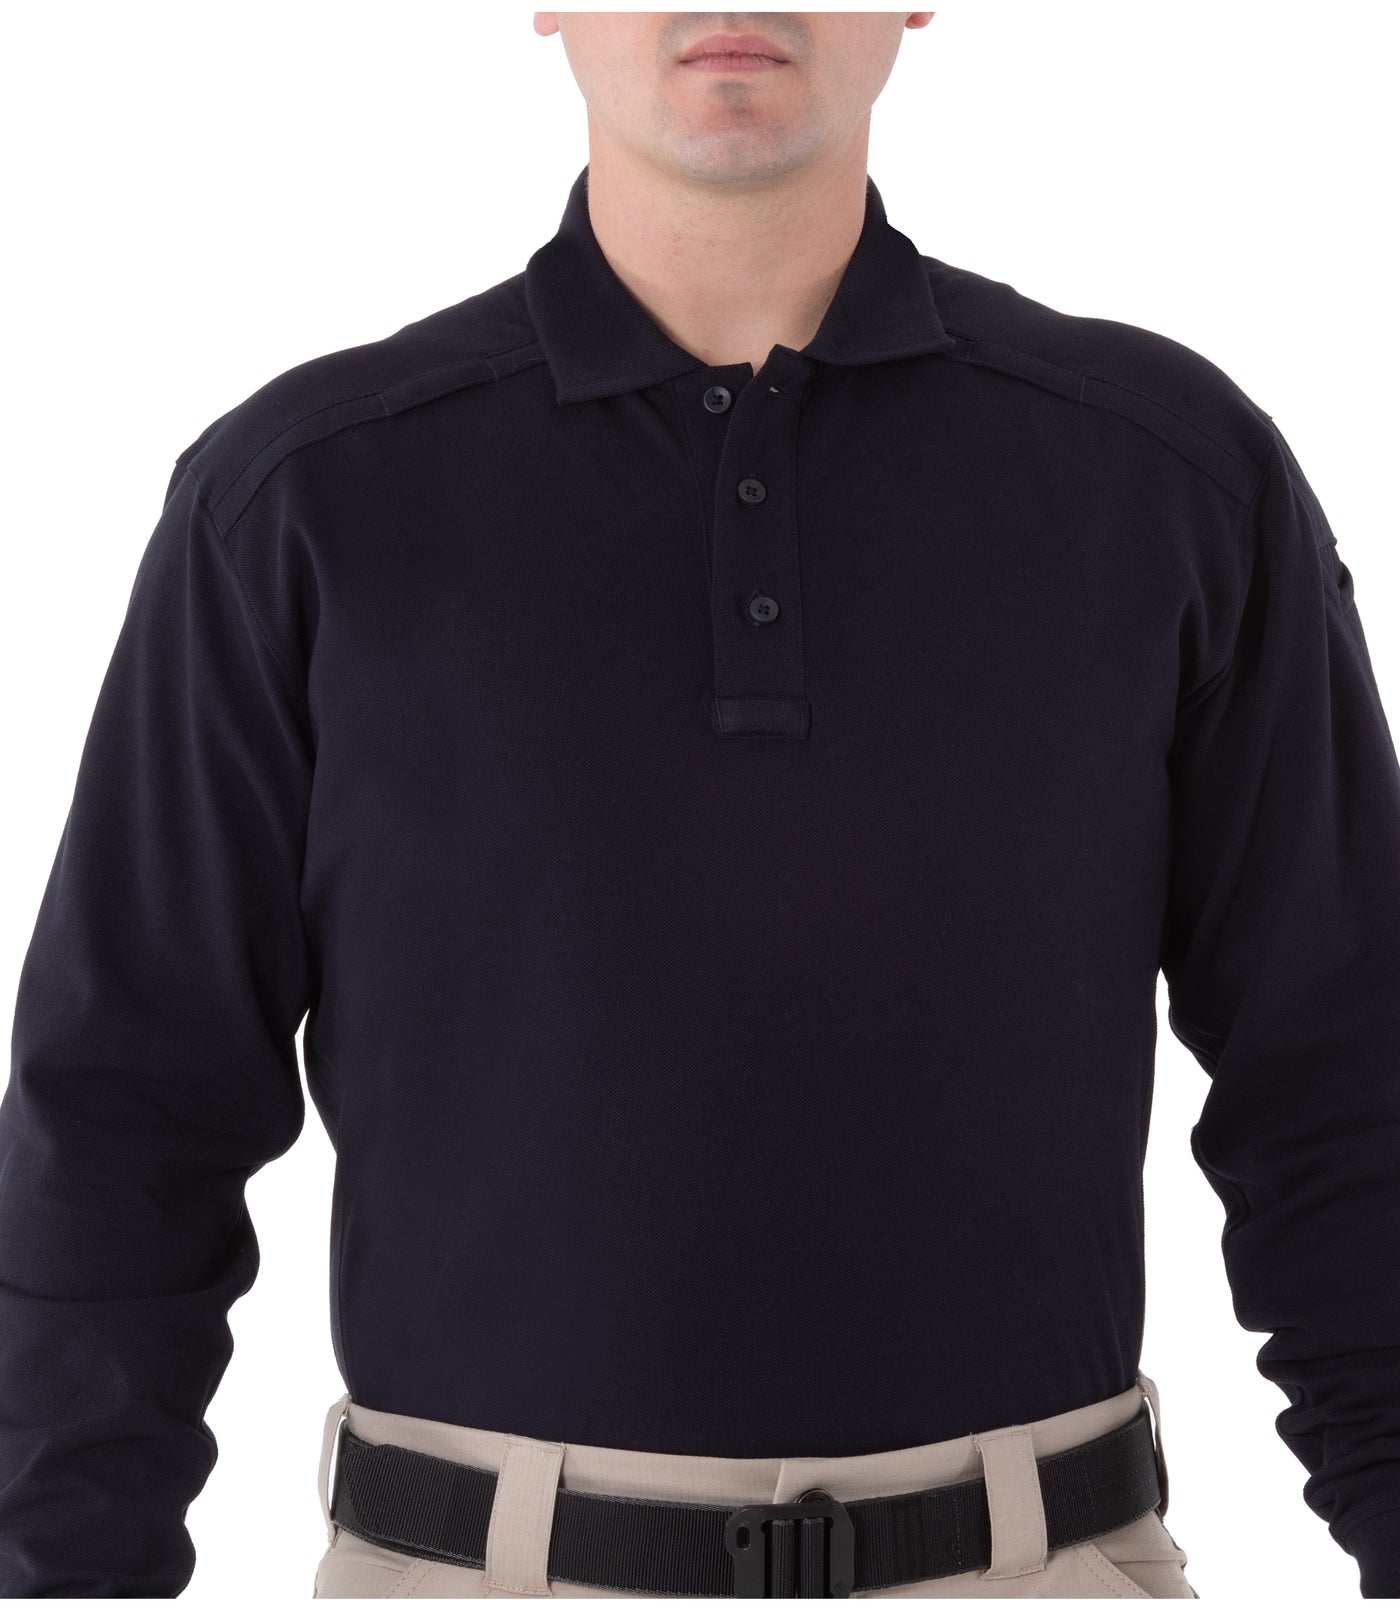 Front of Men's Cotton Long Sleeve Polo in Midnight Navy